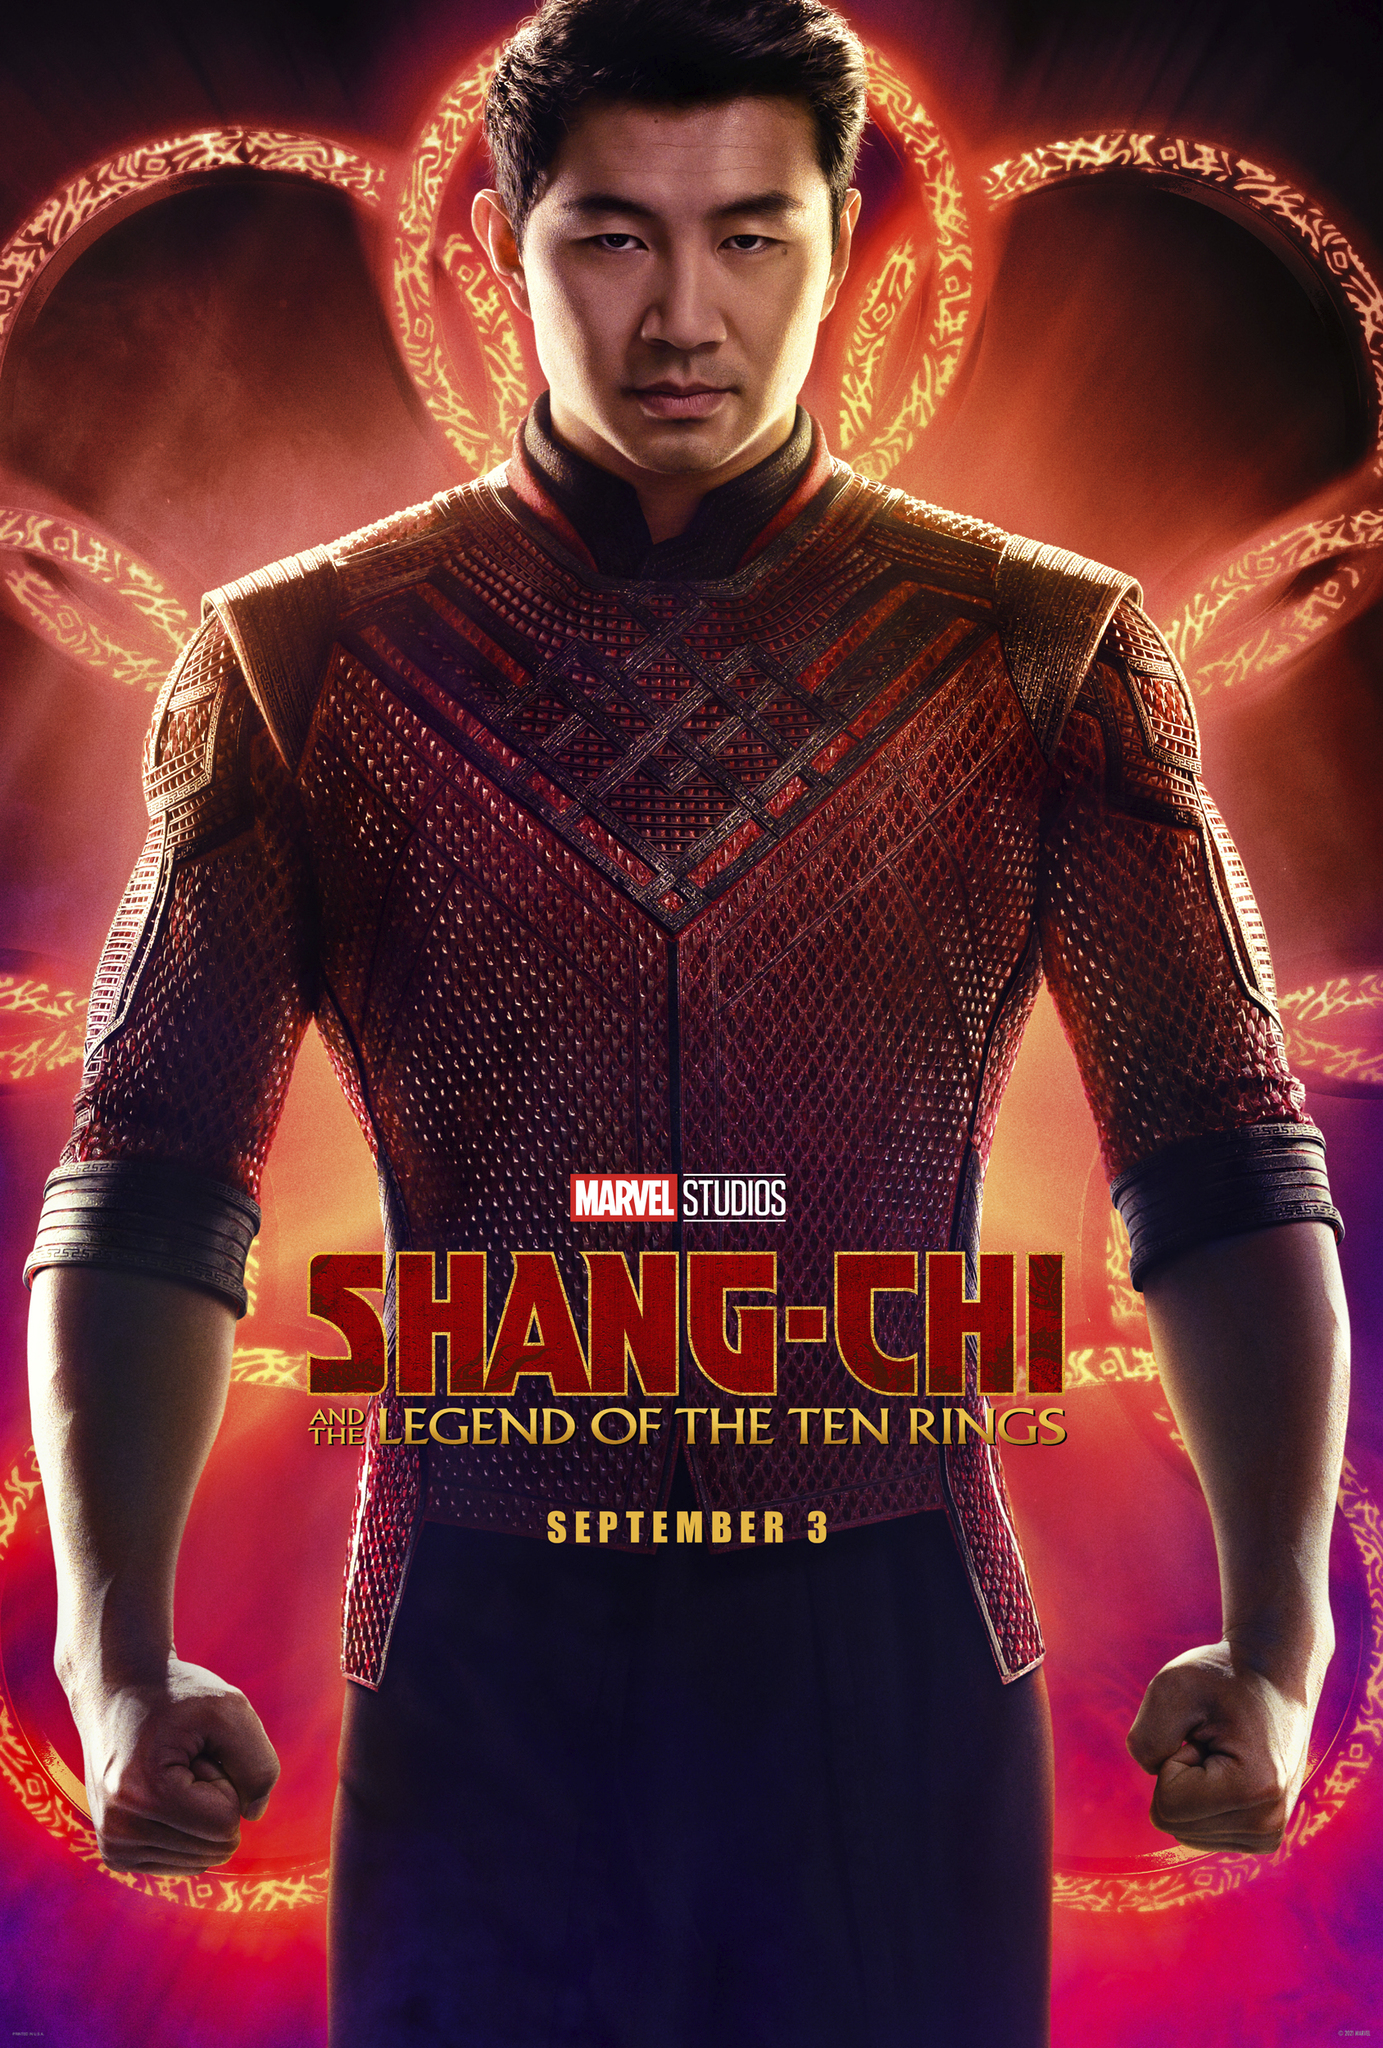 Marvel Studios Shang-Chi and The Legend of The Ten Rings Trailer out now!